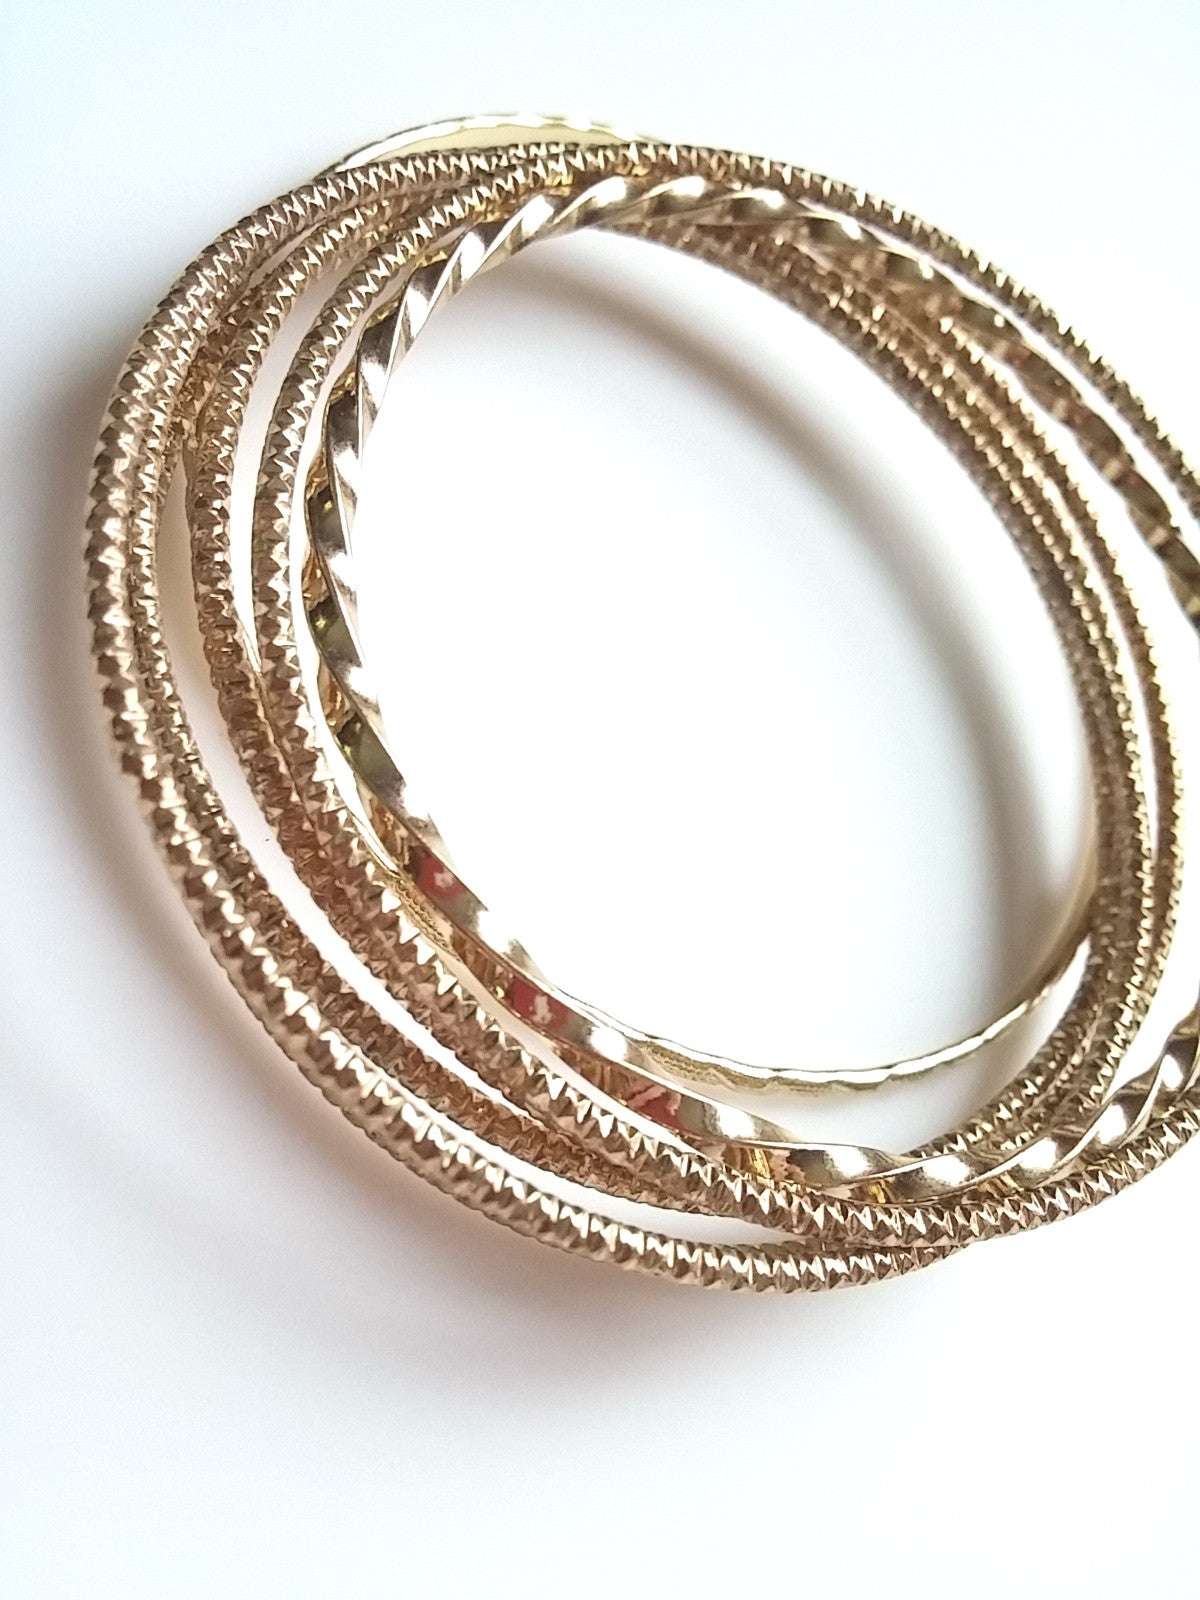 Classic 80s Bangle Bracelets - Gold Tone Mixed Styles- Make a Statement - Dirty 30 Vintage | Vintage Clothing, Vintage Jewelry, Vintage Accessories